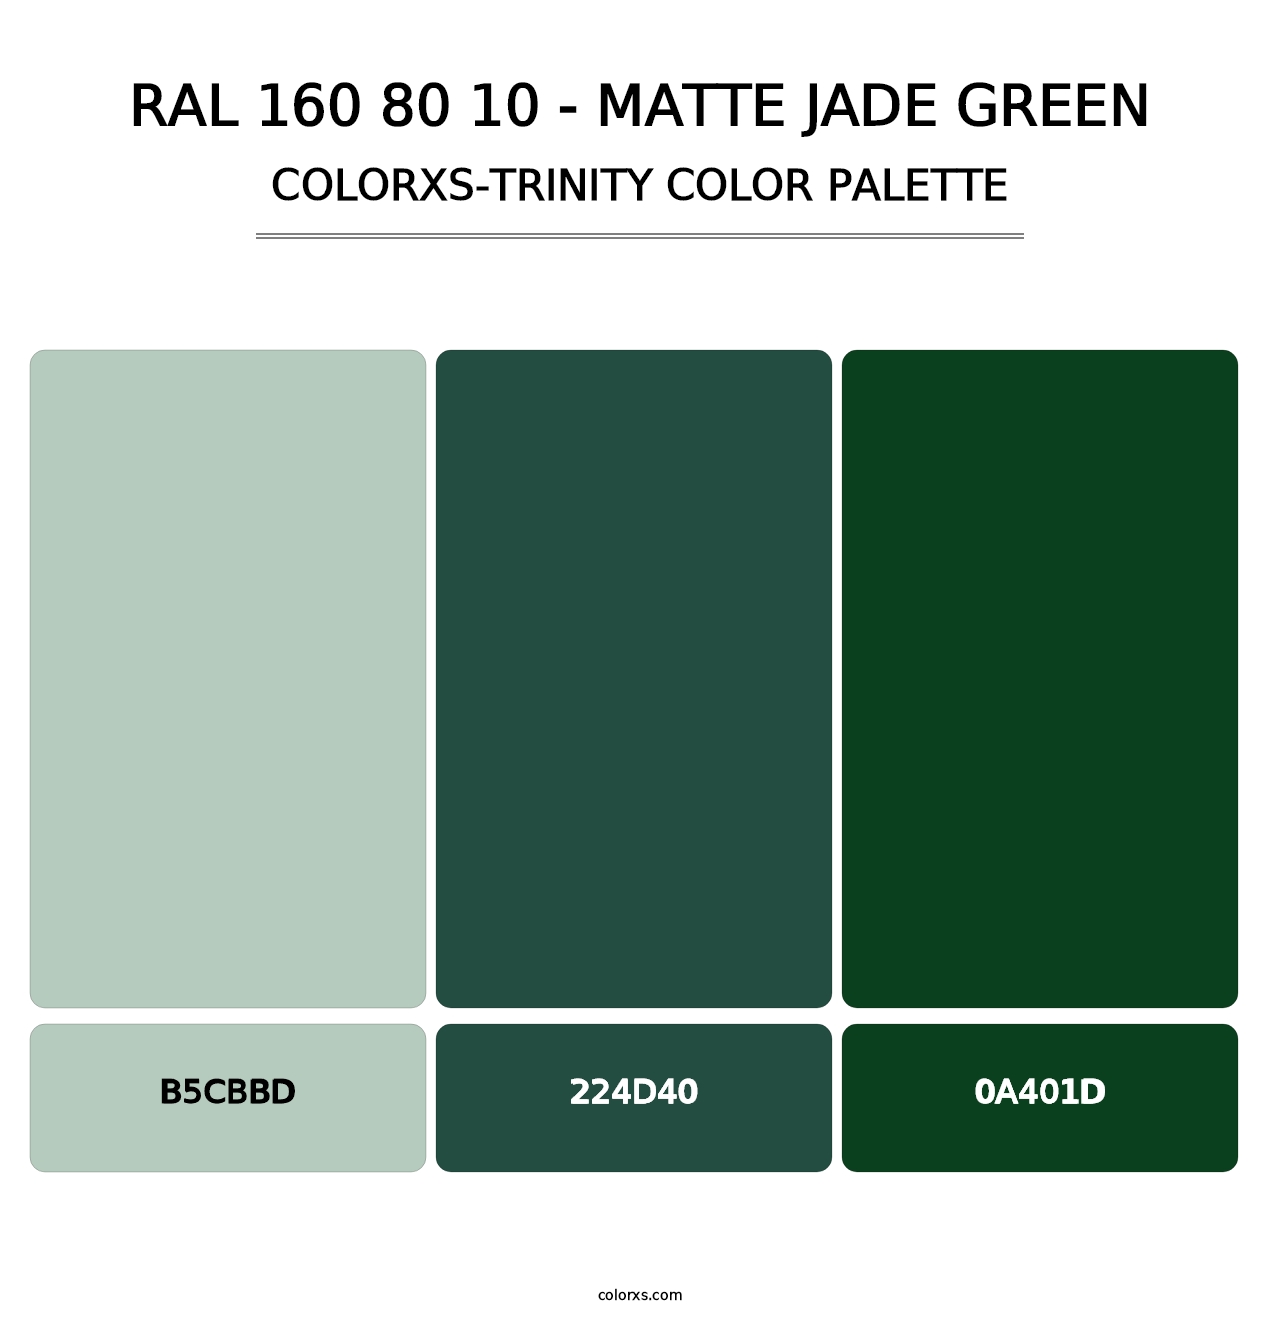 RAL 160 80 10 - Matte Jade Green - Colorxs Trinity Palette